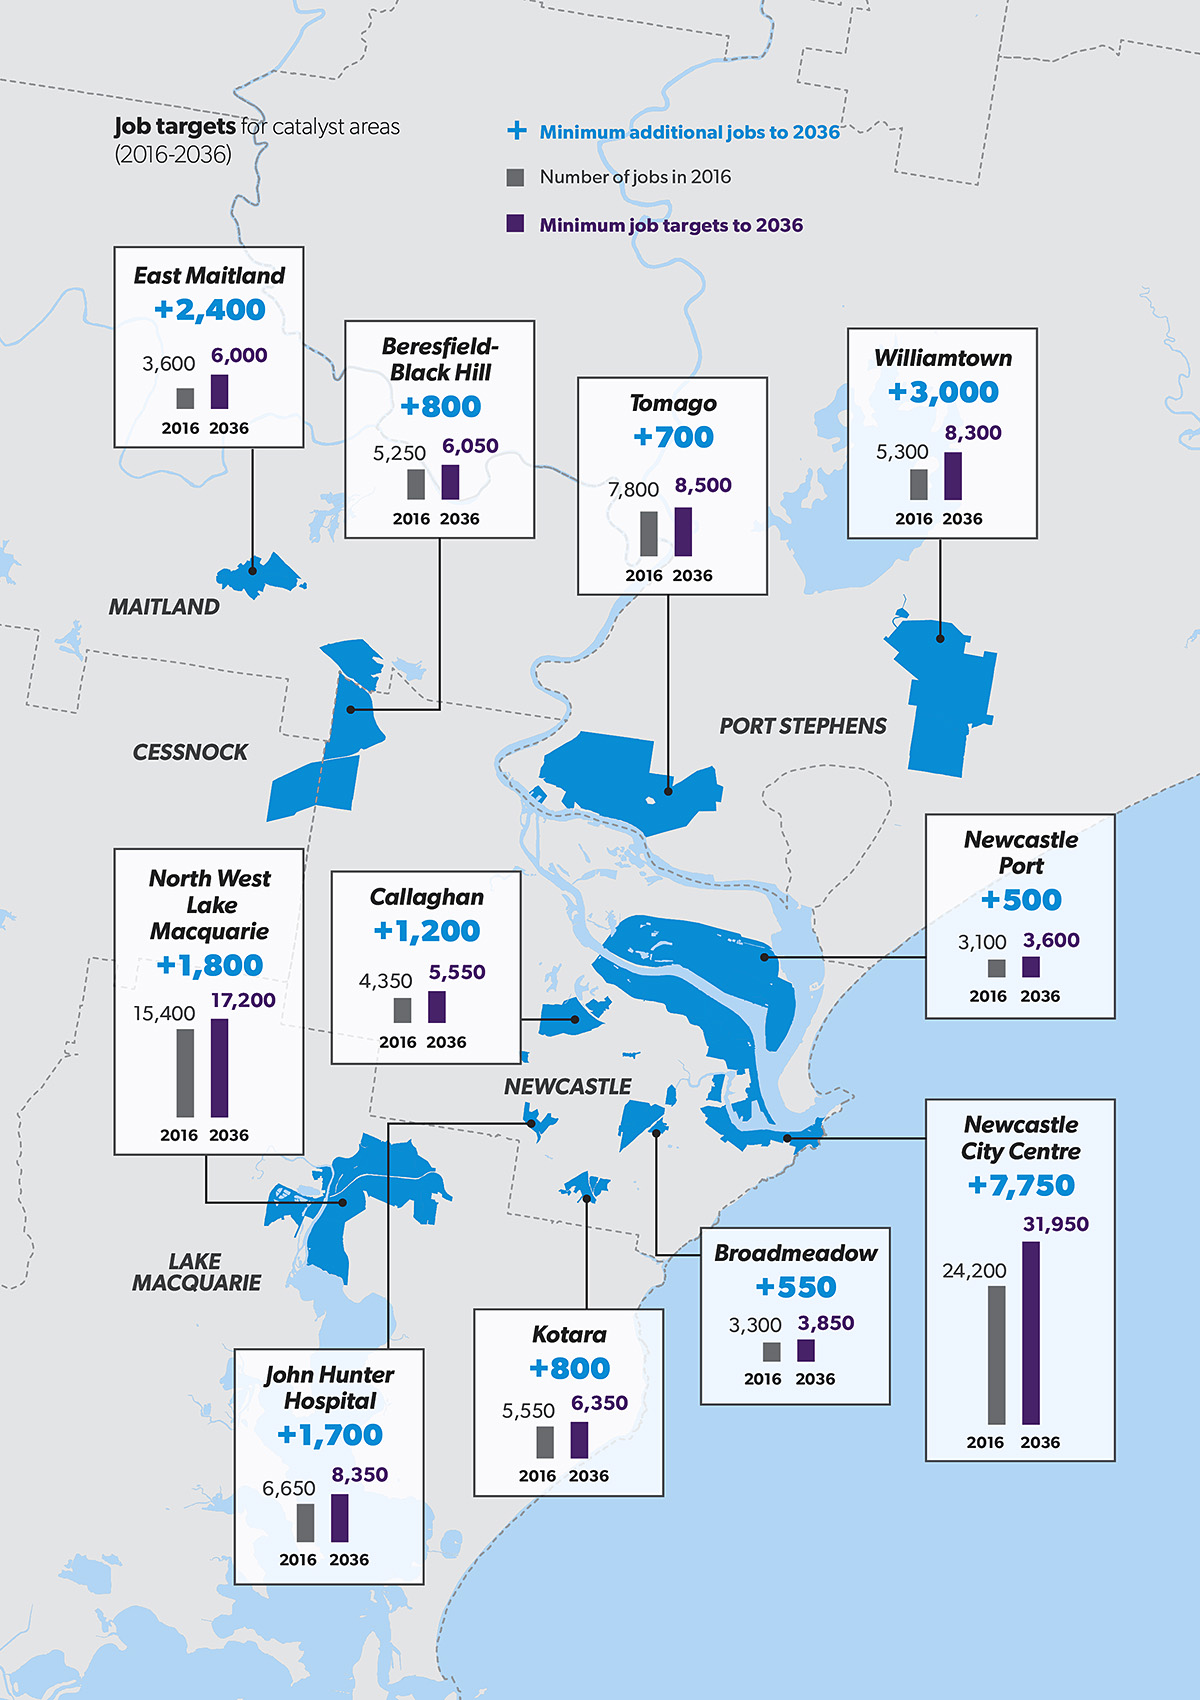 Activate job targets for catalyst areas 2016-2036 – Greater Newcastle infographic